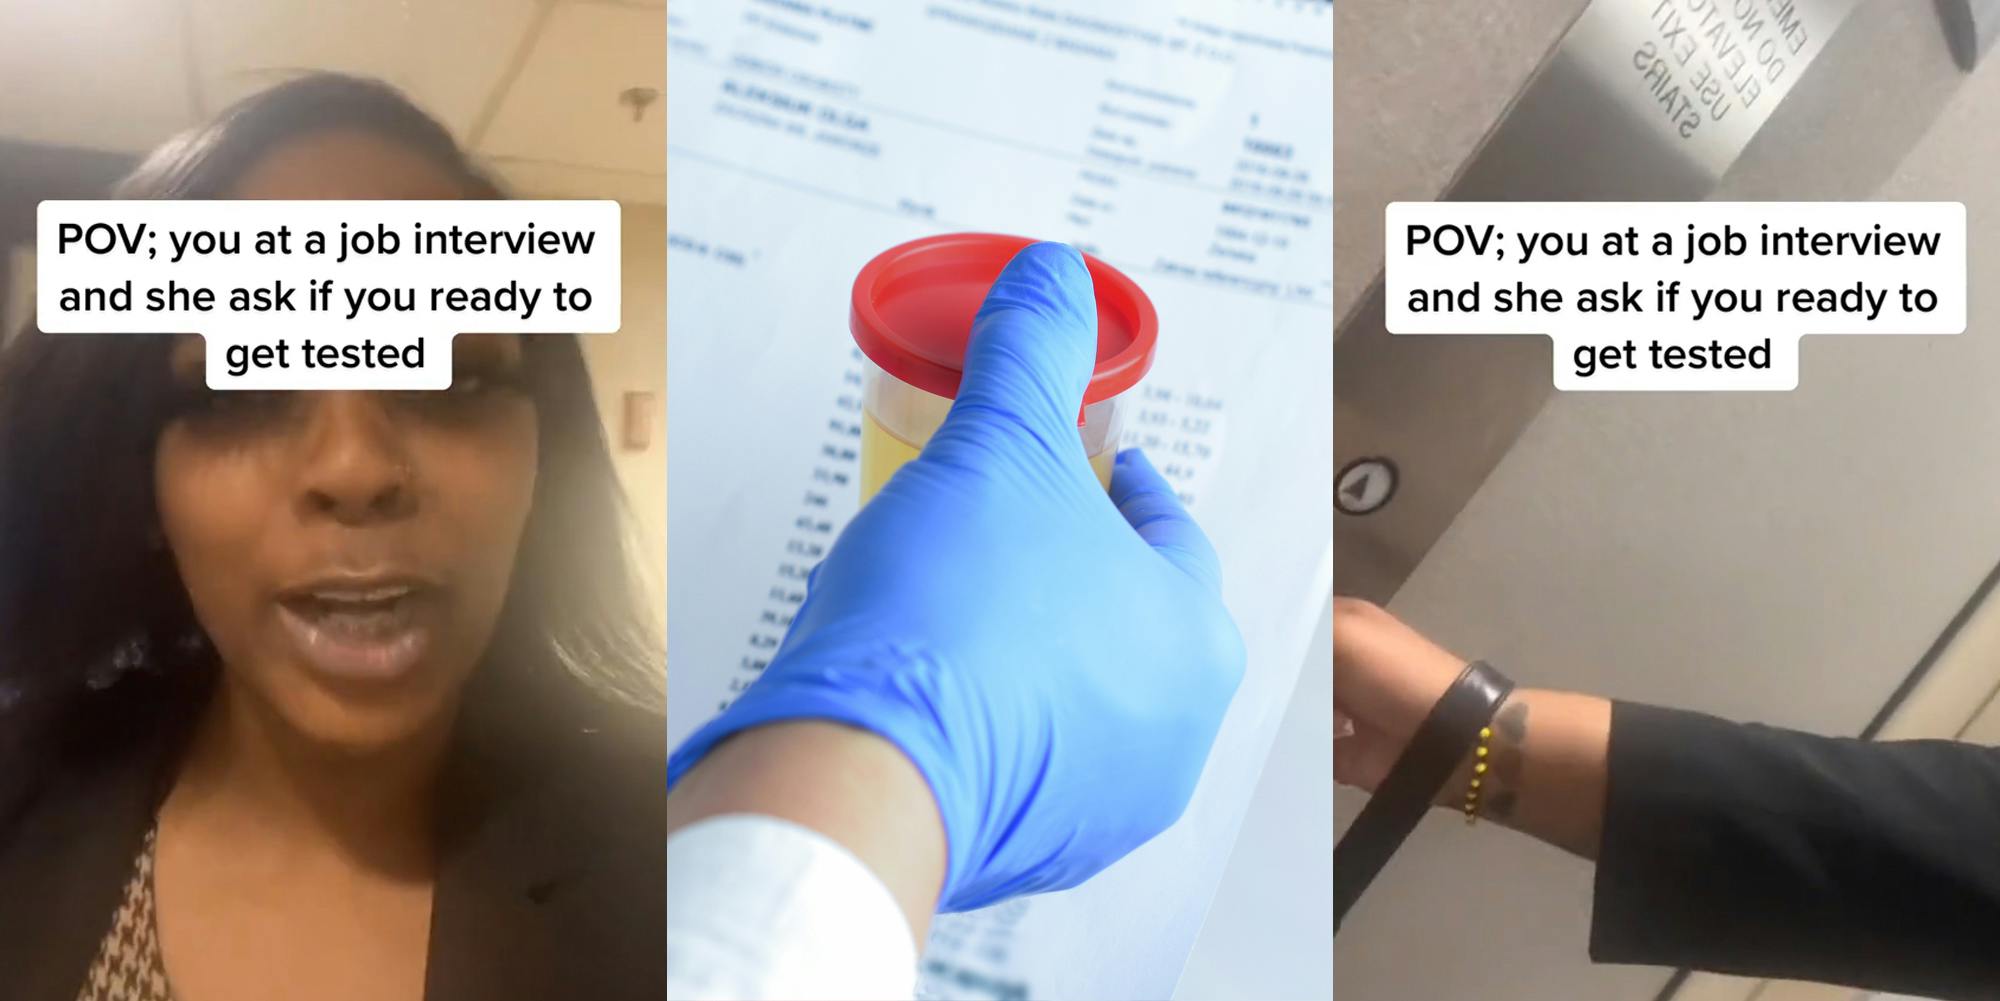 woman speaking with caption "POV: you at a job interview and she ask if you ready to get tested" (l) person with glove on holding urine in cup for drug test (c) woman hand pressing elevator button with caption "POV: you at a job interview and she ask if you ready to get tested" (r)